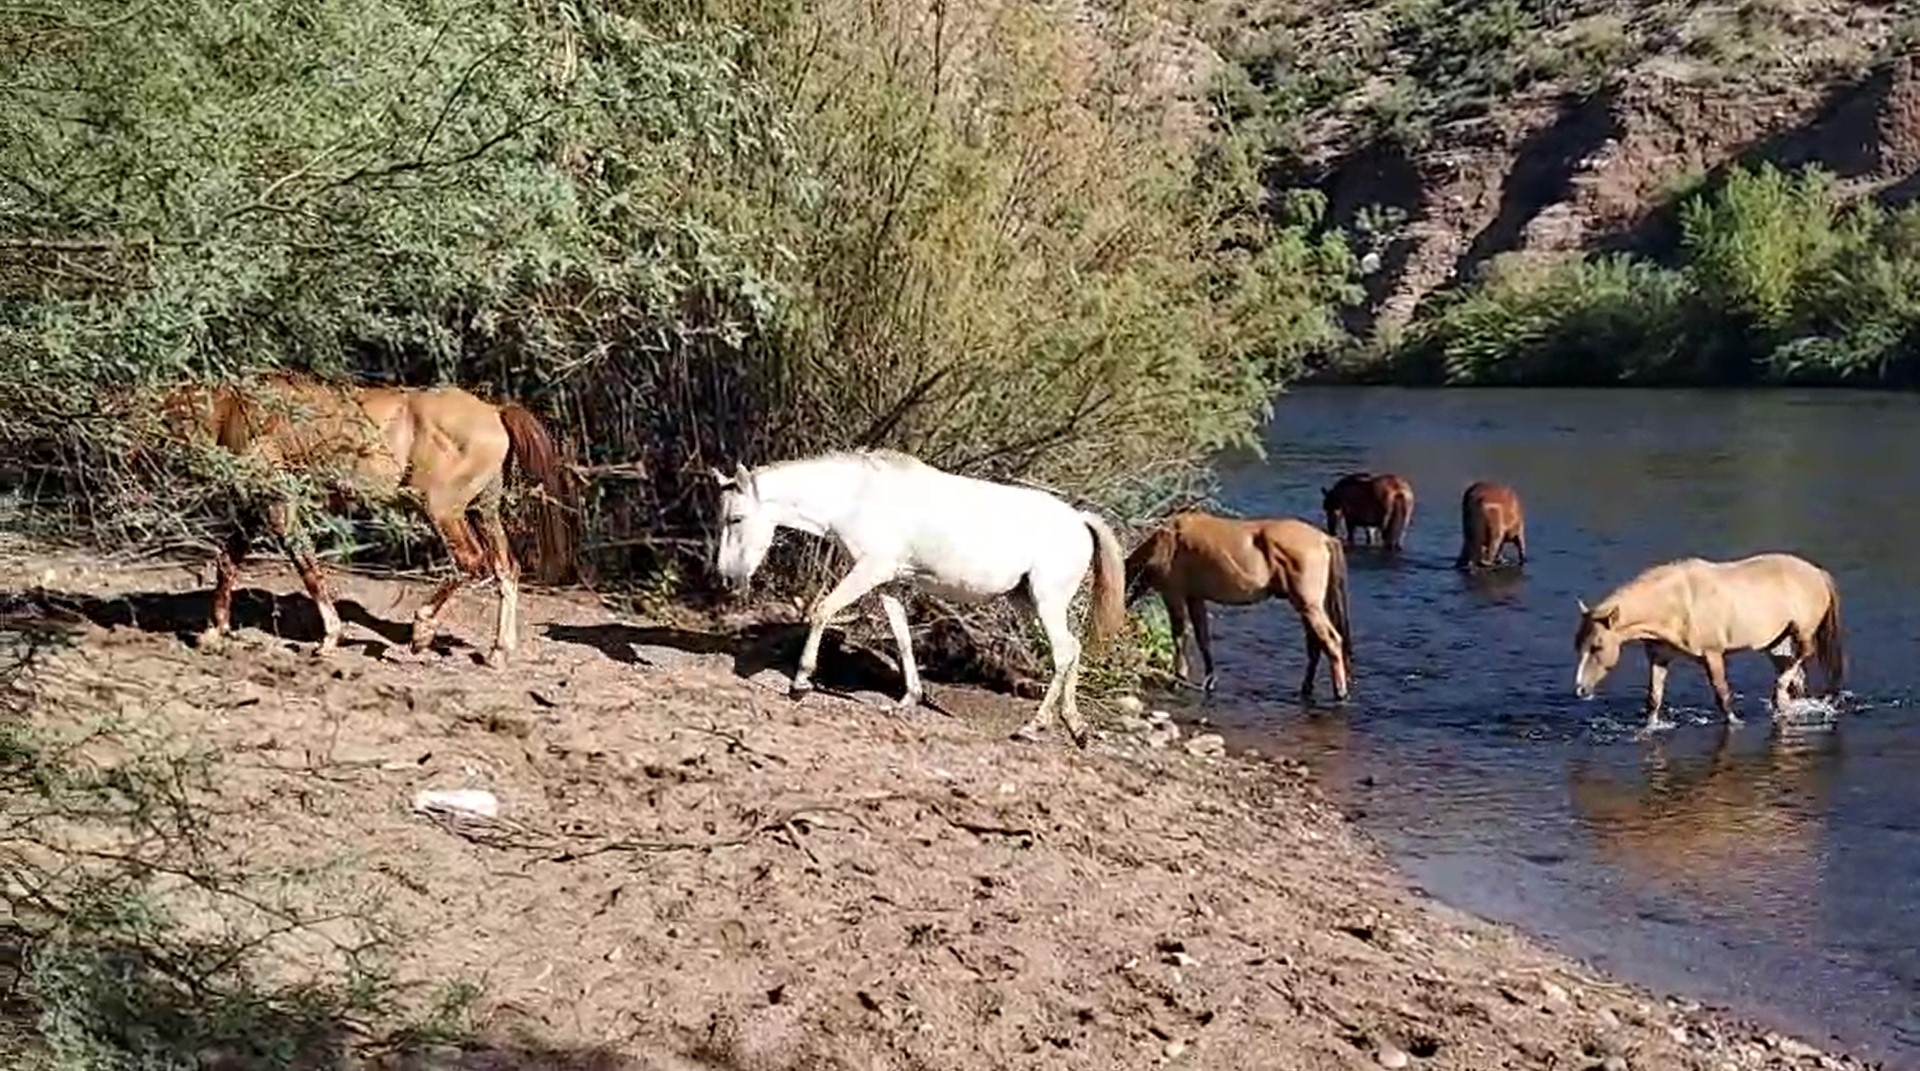 [Video] Horses strolling by the water